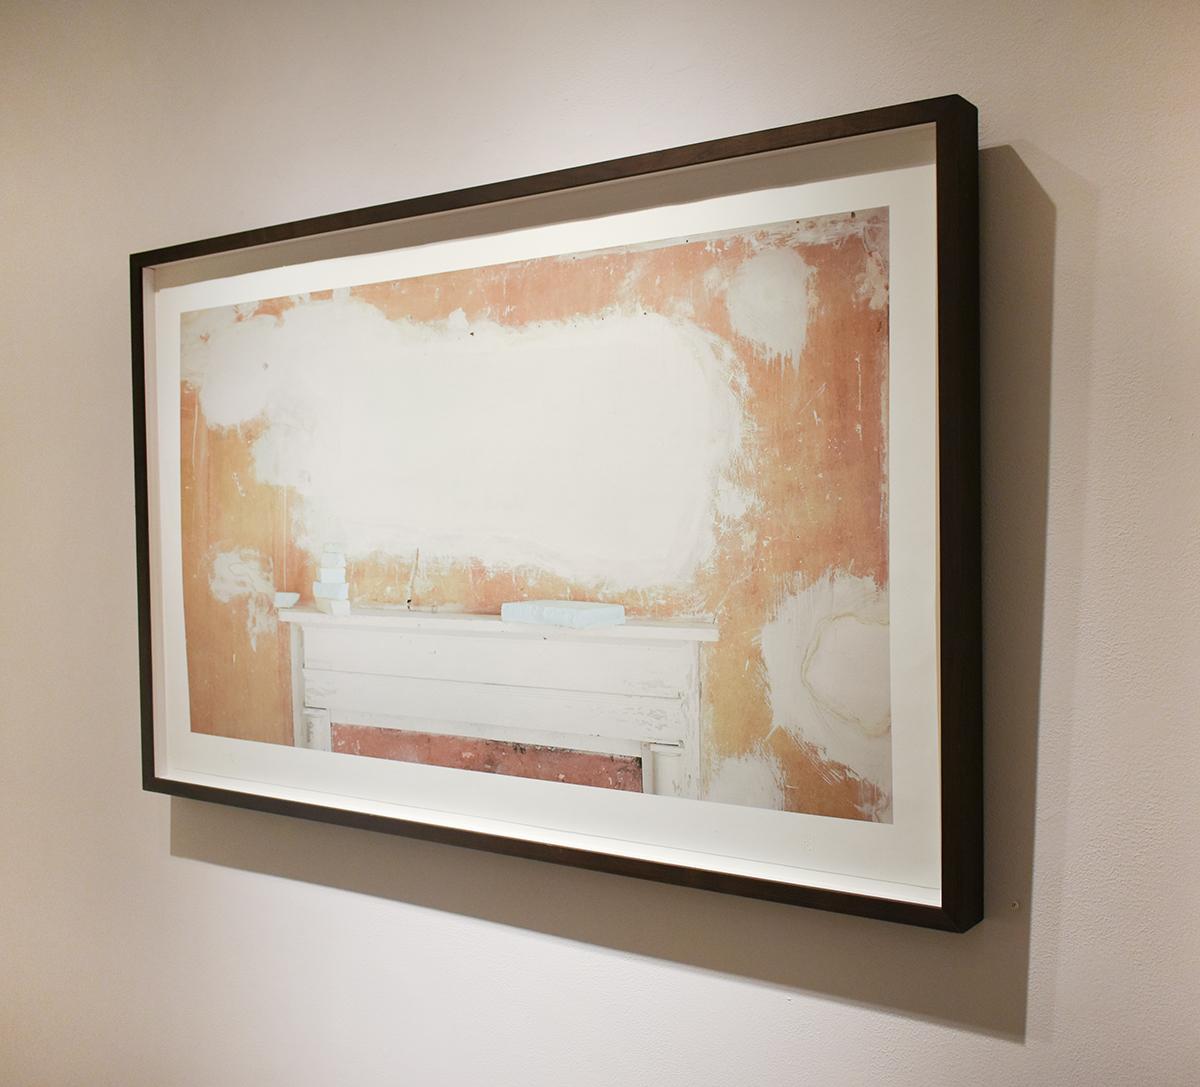 Plaster Clouds (Still Life Photograph of Light Orange Wall with White Plaster)  - Beige Still-Life Photograph by David Halliday